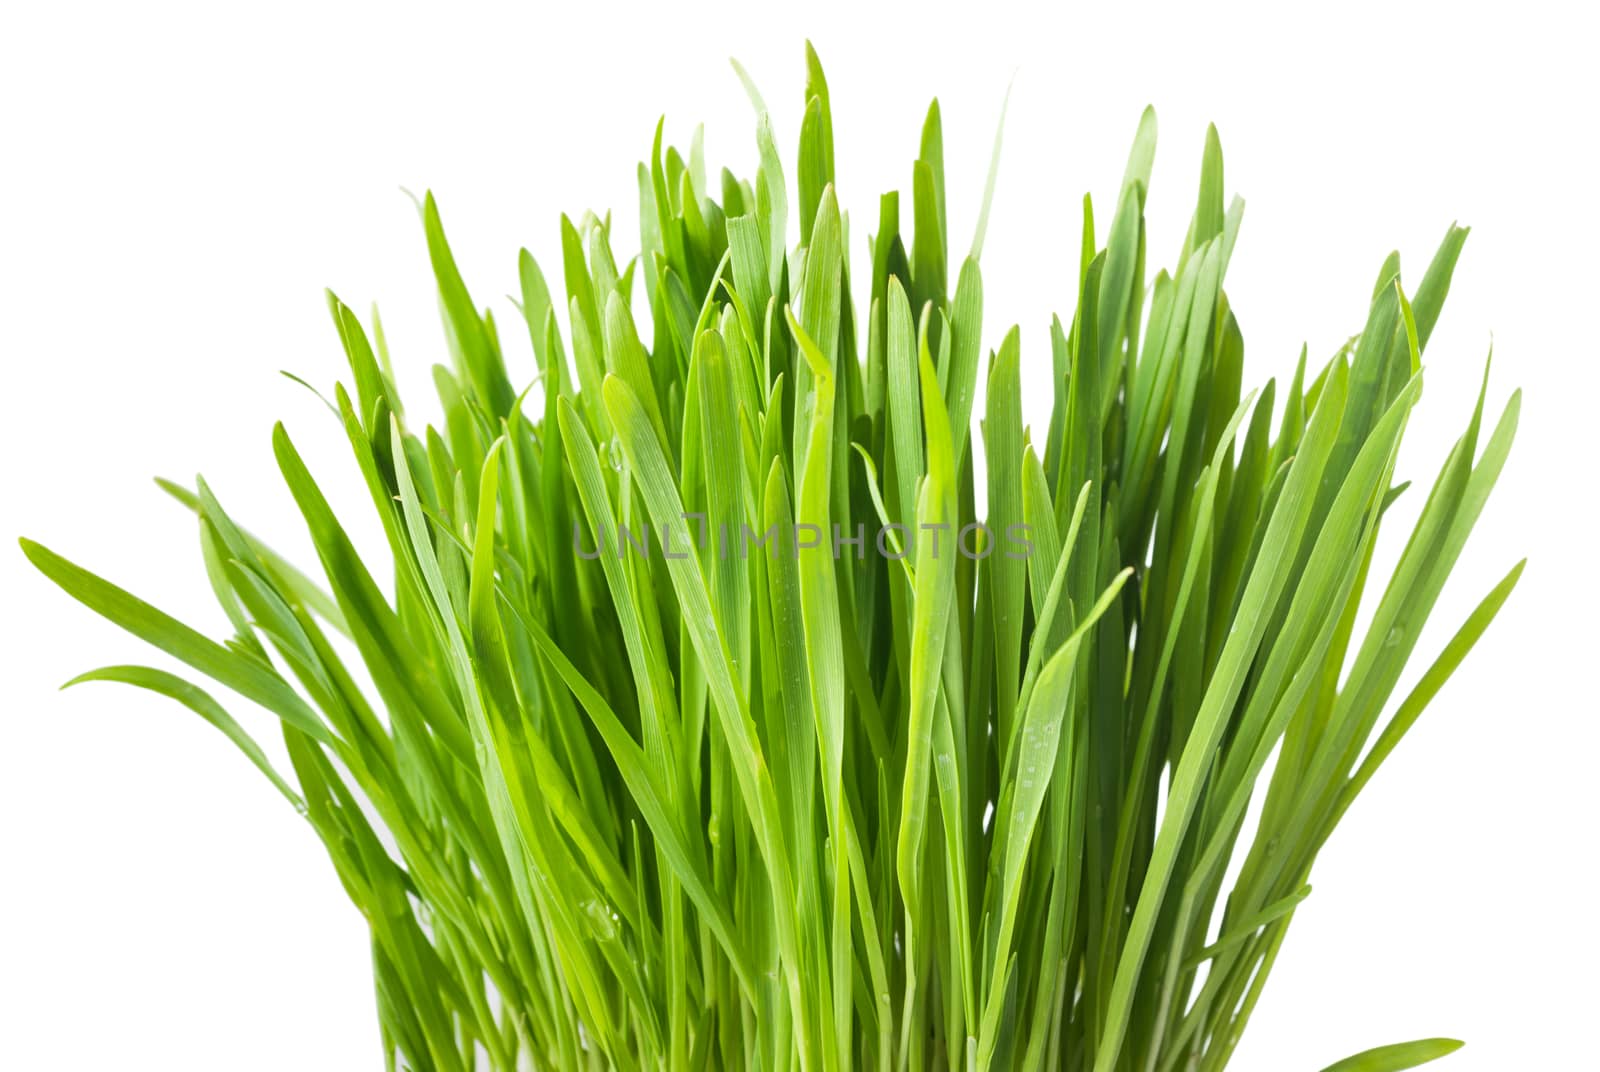 Young green sprouts of oat for healthy lifestyle, fresh green grass, close up, isolated on white background